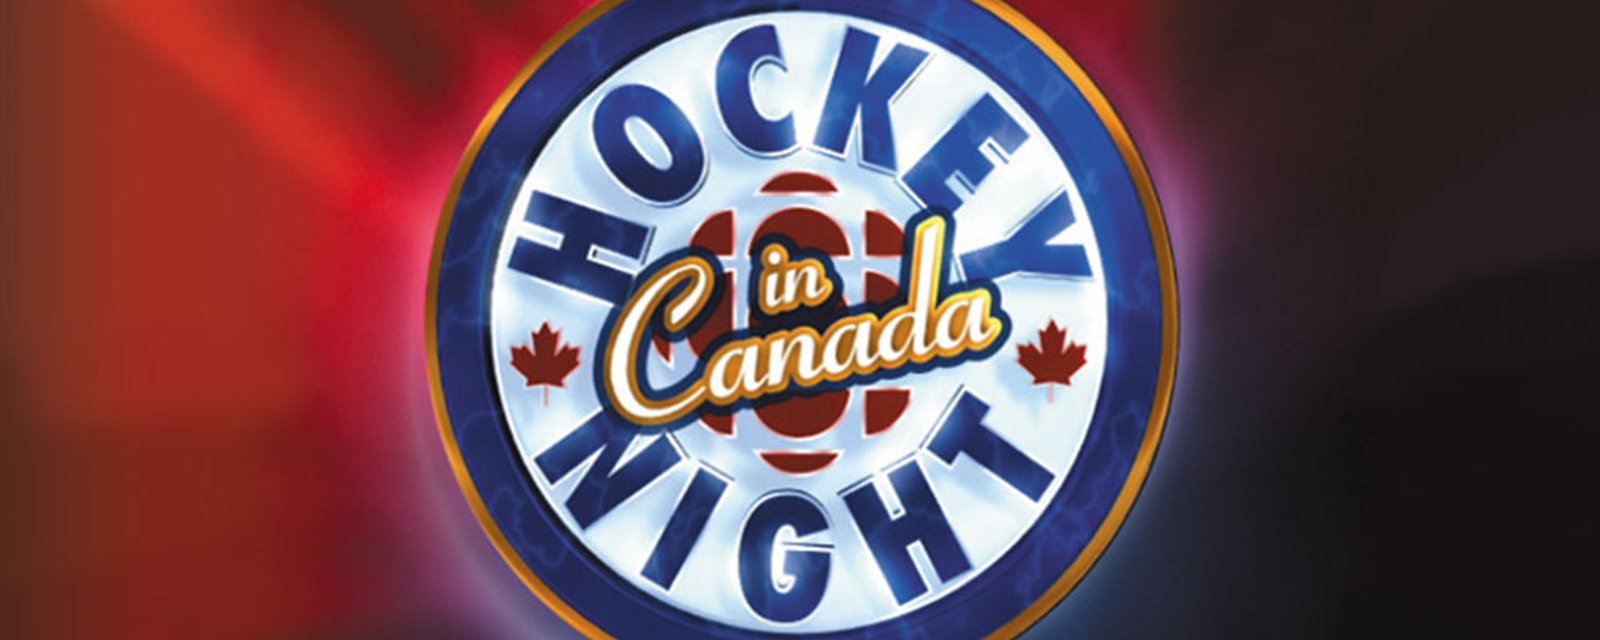 Sportsnet takes flak for having no Canadian teams involved in Hockey Night in Canada